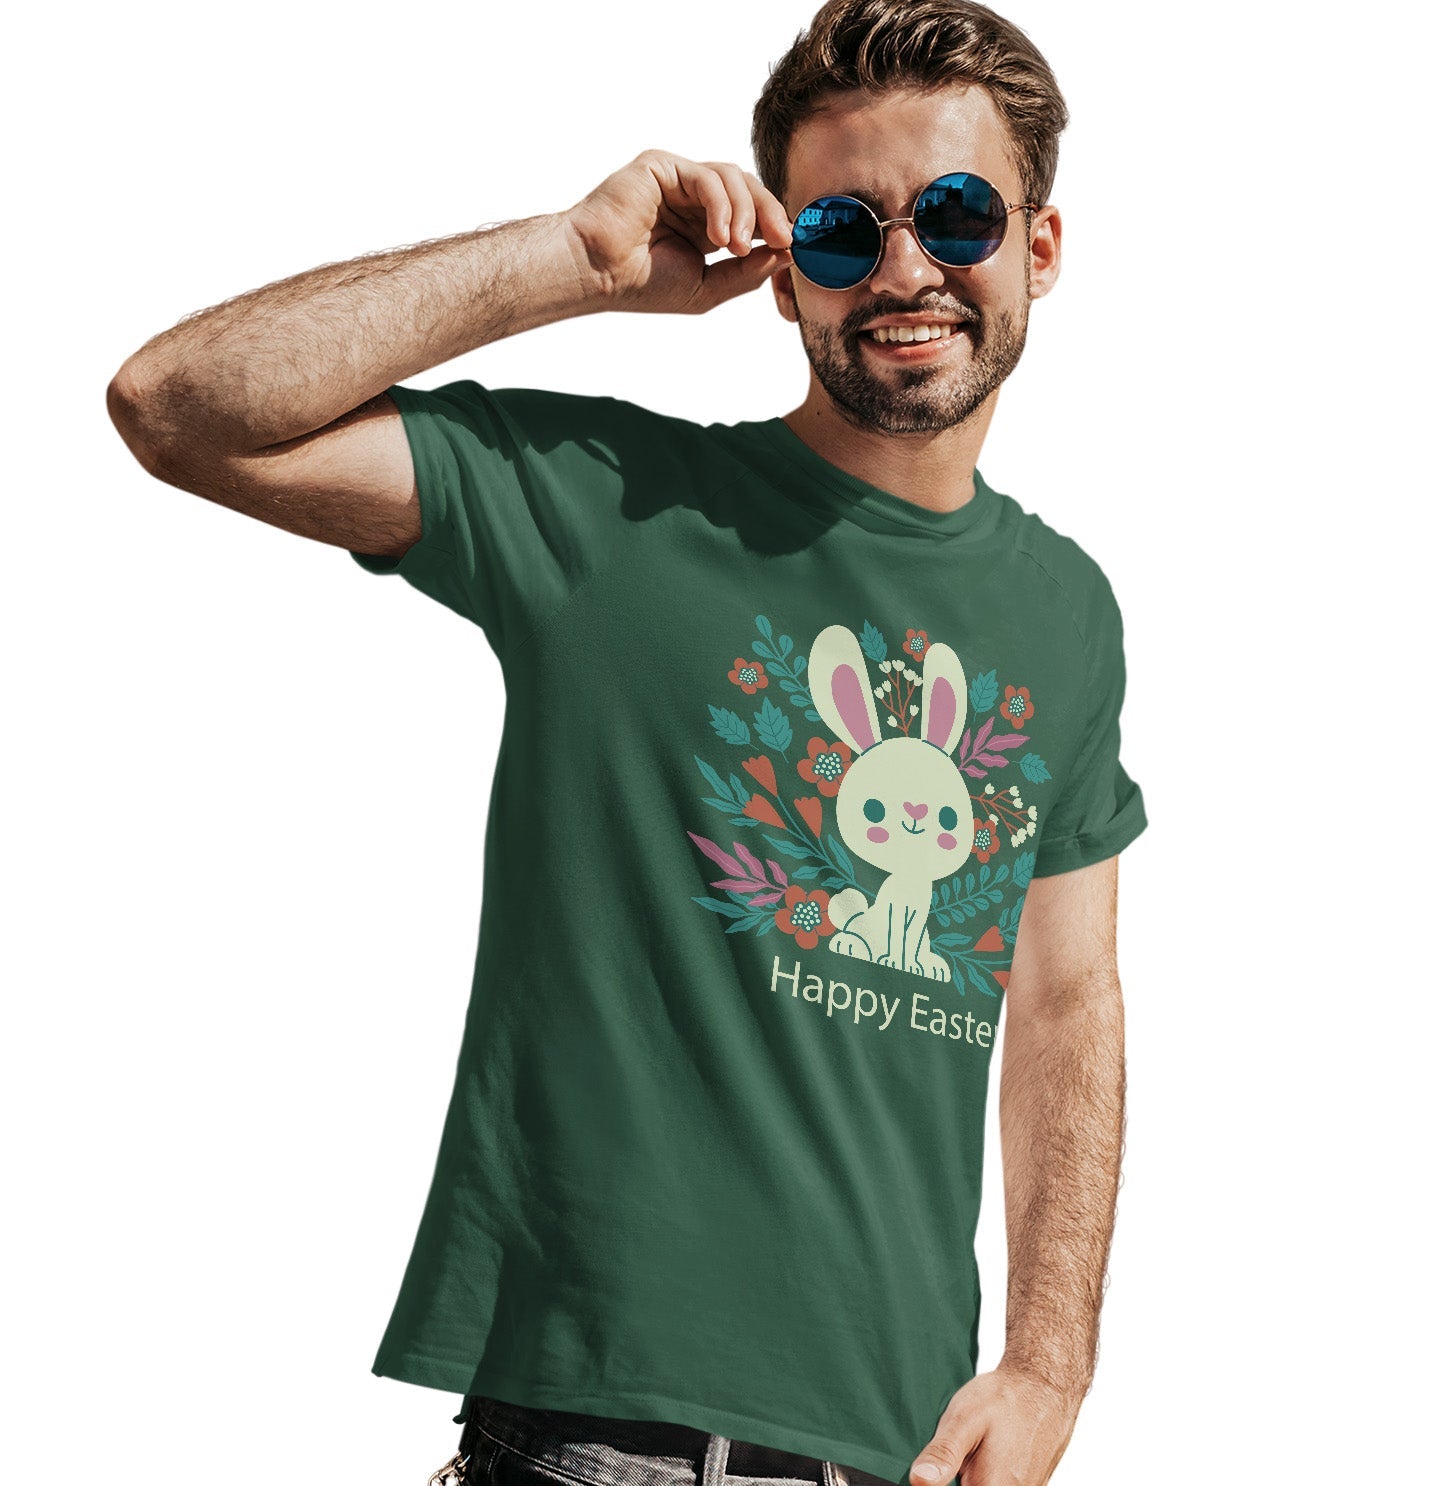 Easter Floral Bunny - Adult Unisex T-Shirt